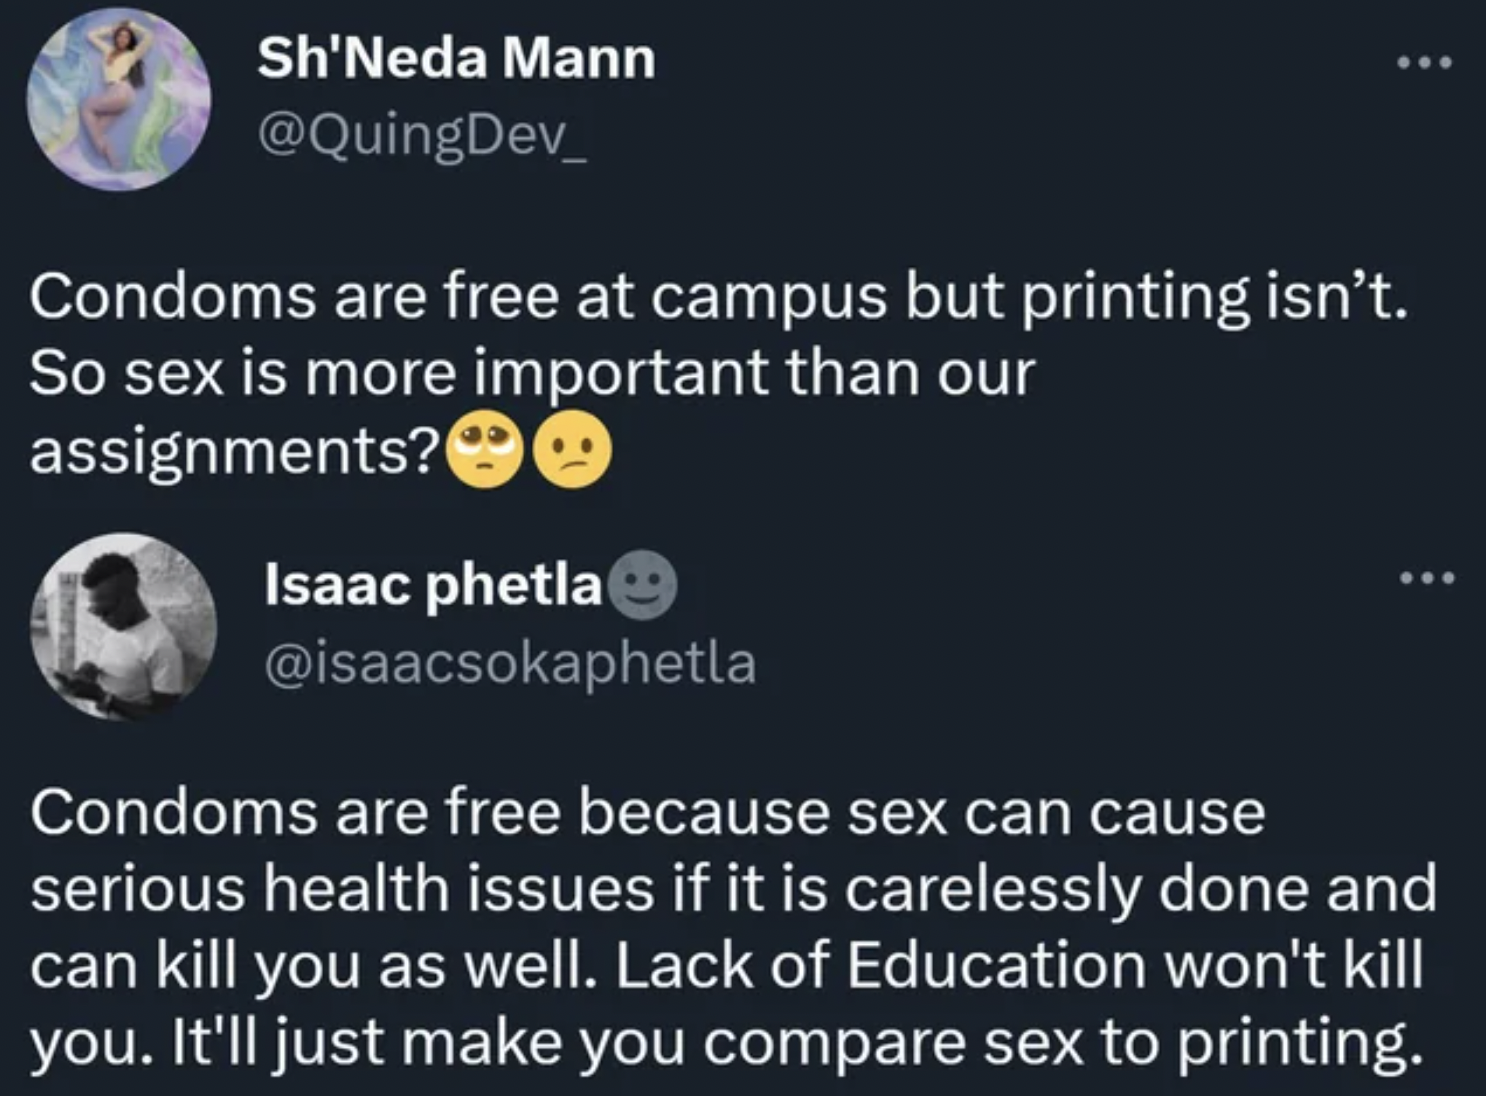 Trashy fails - Mann Condoms are free at campus but printing isn't. So sex is more important than our assignments? Isaac phetla Condoms are free because sex can cause serious health issues if it is carelessly done and can kill you as well. Lack of Educatio